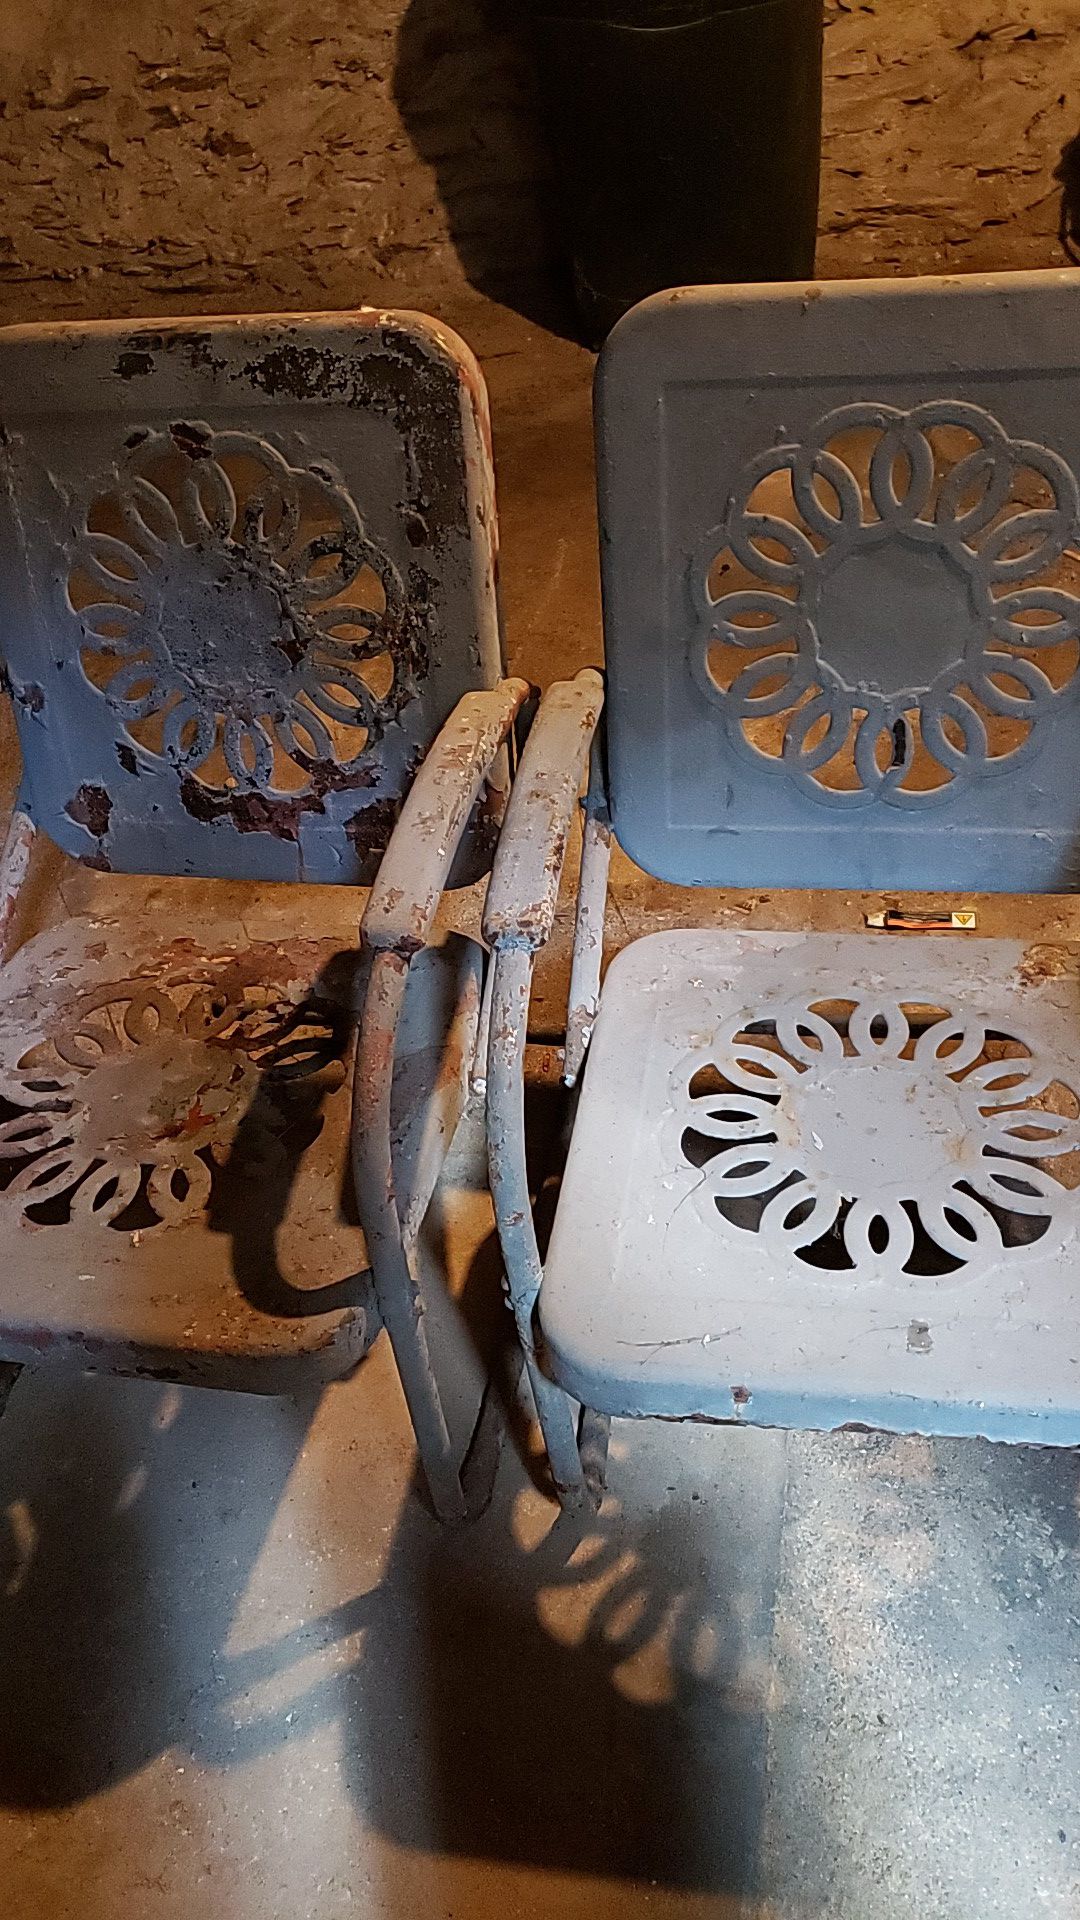 50s style chairs